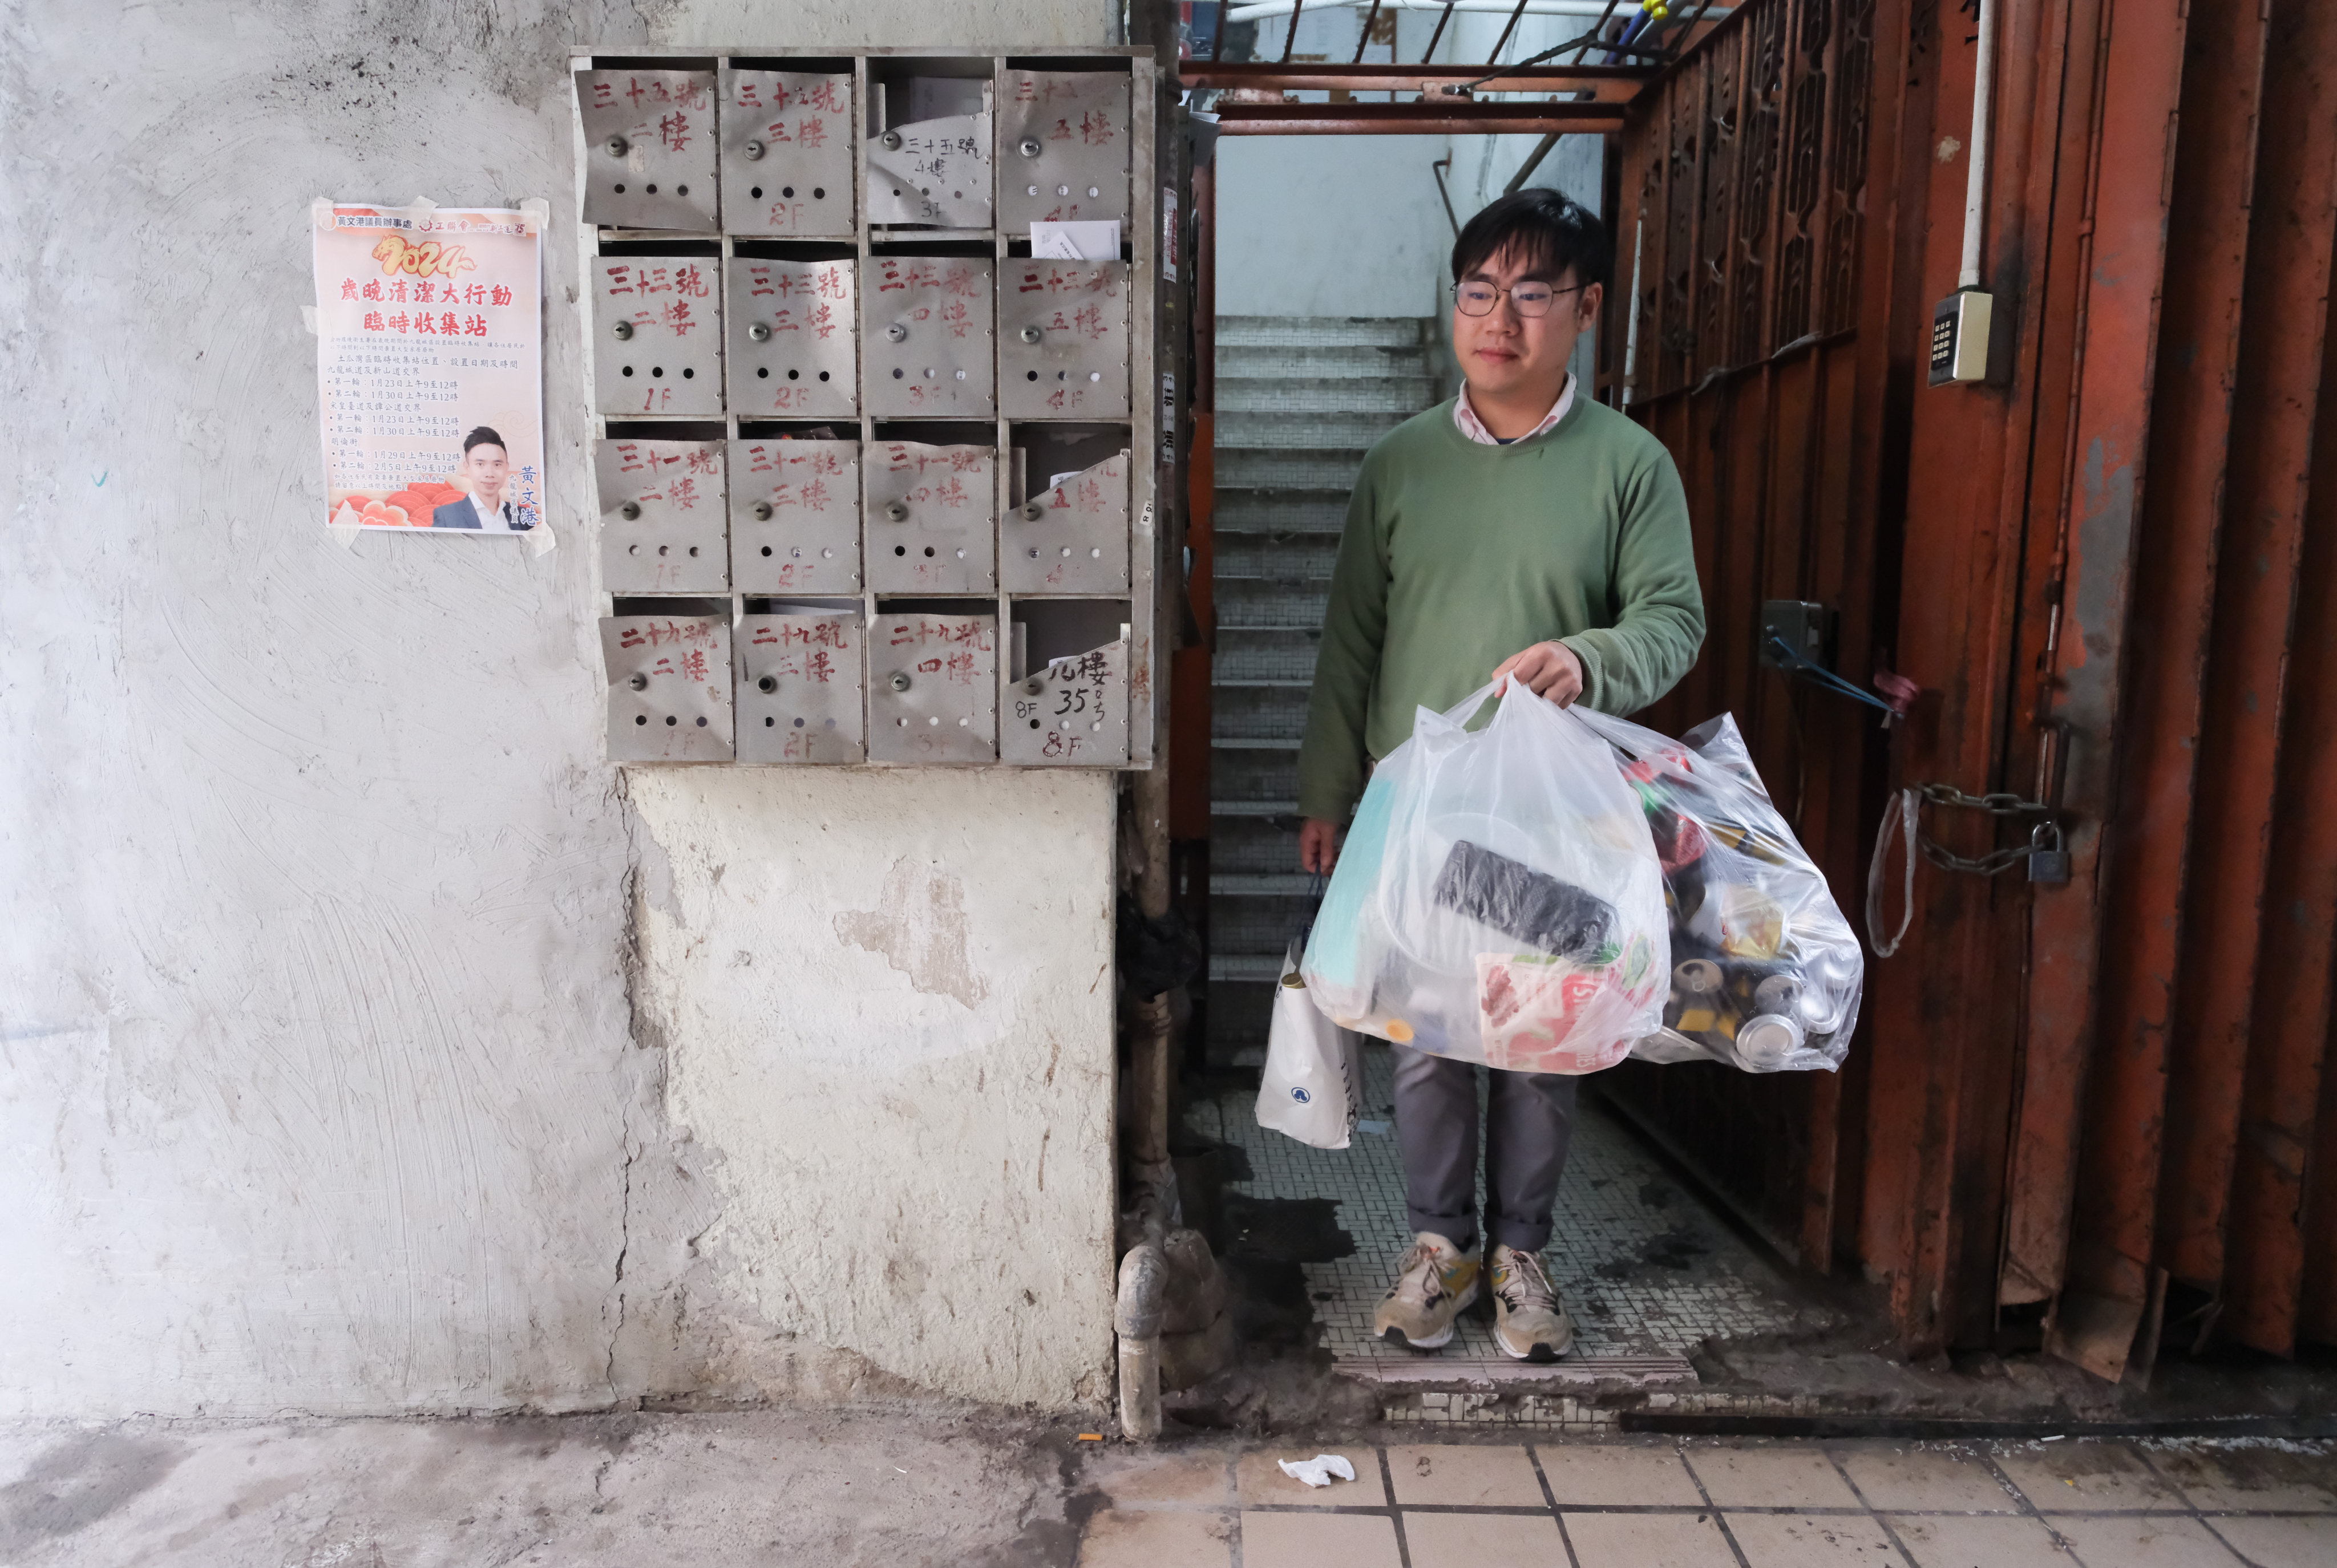 A resident of a “three-nil building” takes recyclable waste to a community recycling station. To encourage waste reduction and recycling, recycling bins should be conveniently located and recycling station operating hours extended. Photo: Sun Yeung

